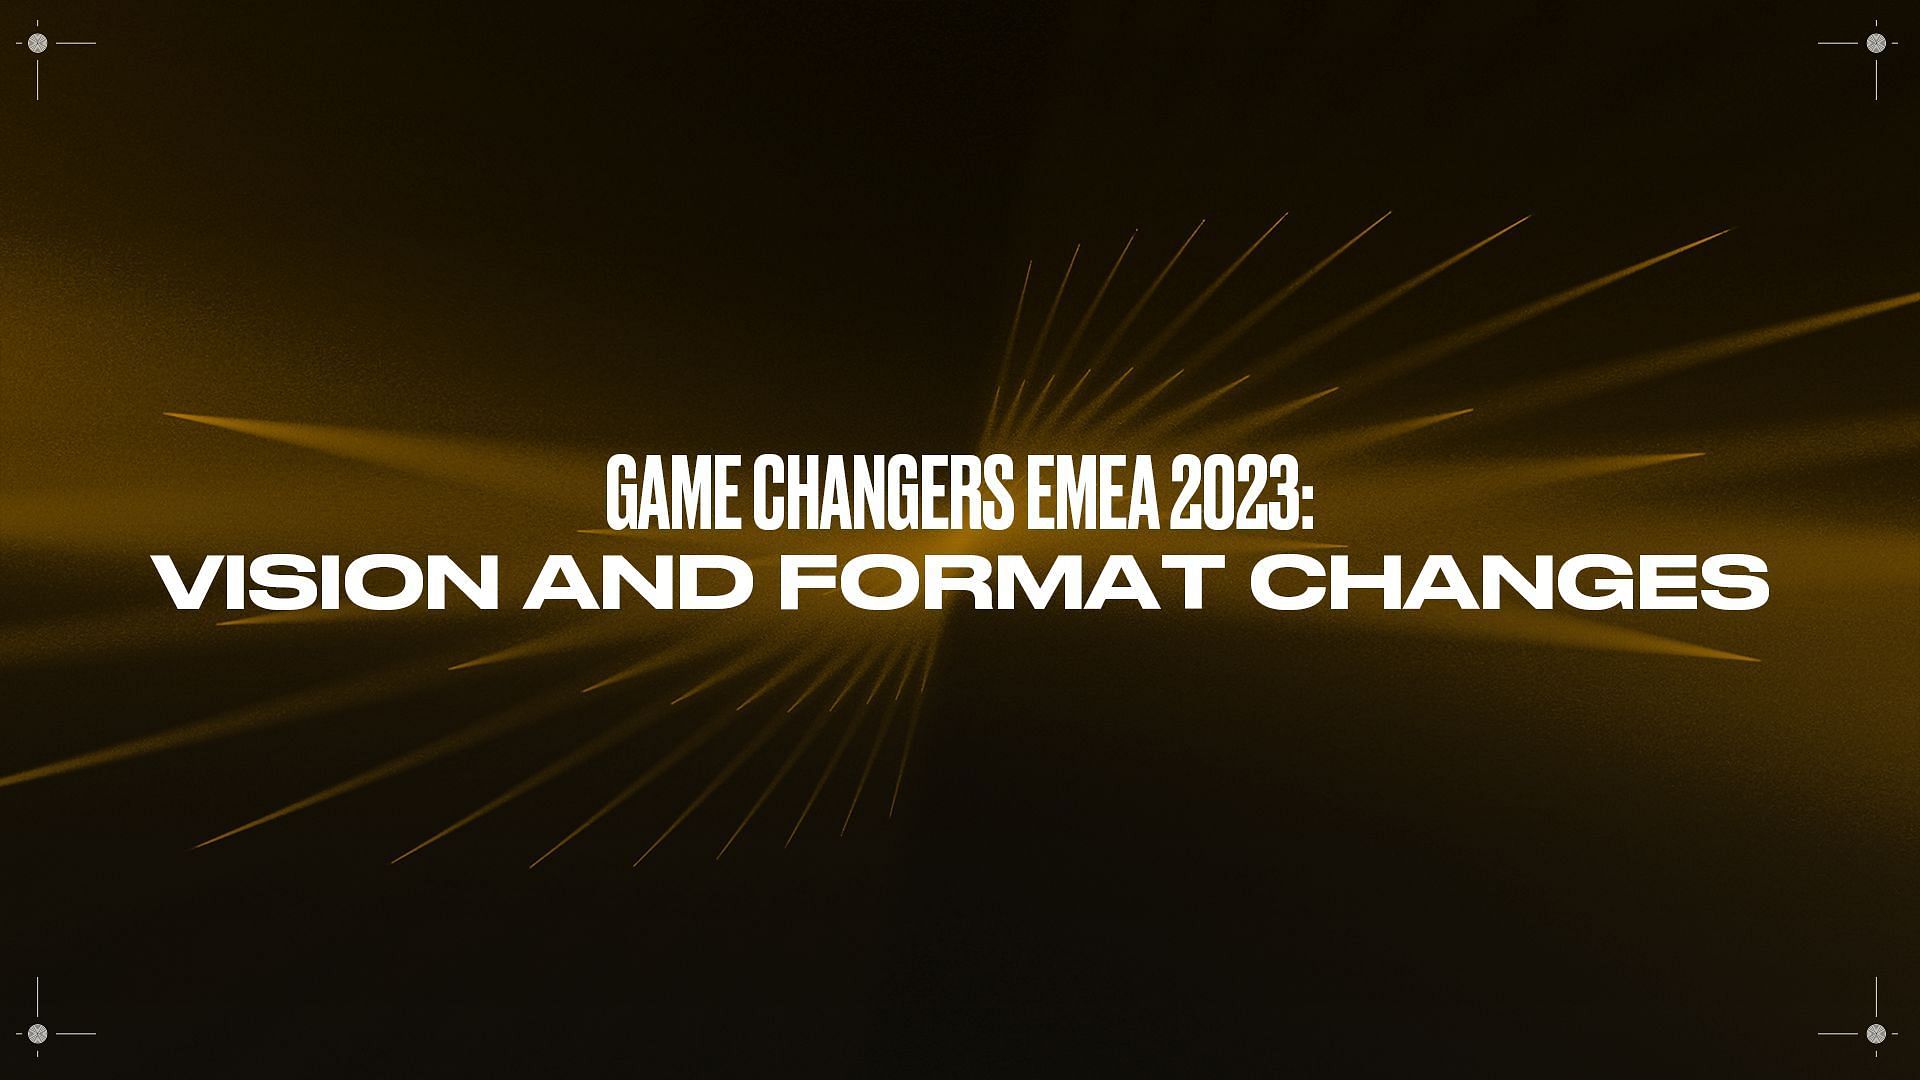 VCT Game Changers EMEA 2023 will advance with a new format and changes (Image via Riot Games)